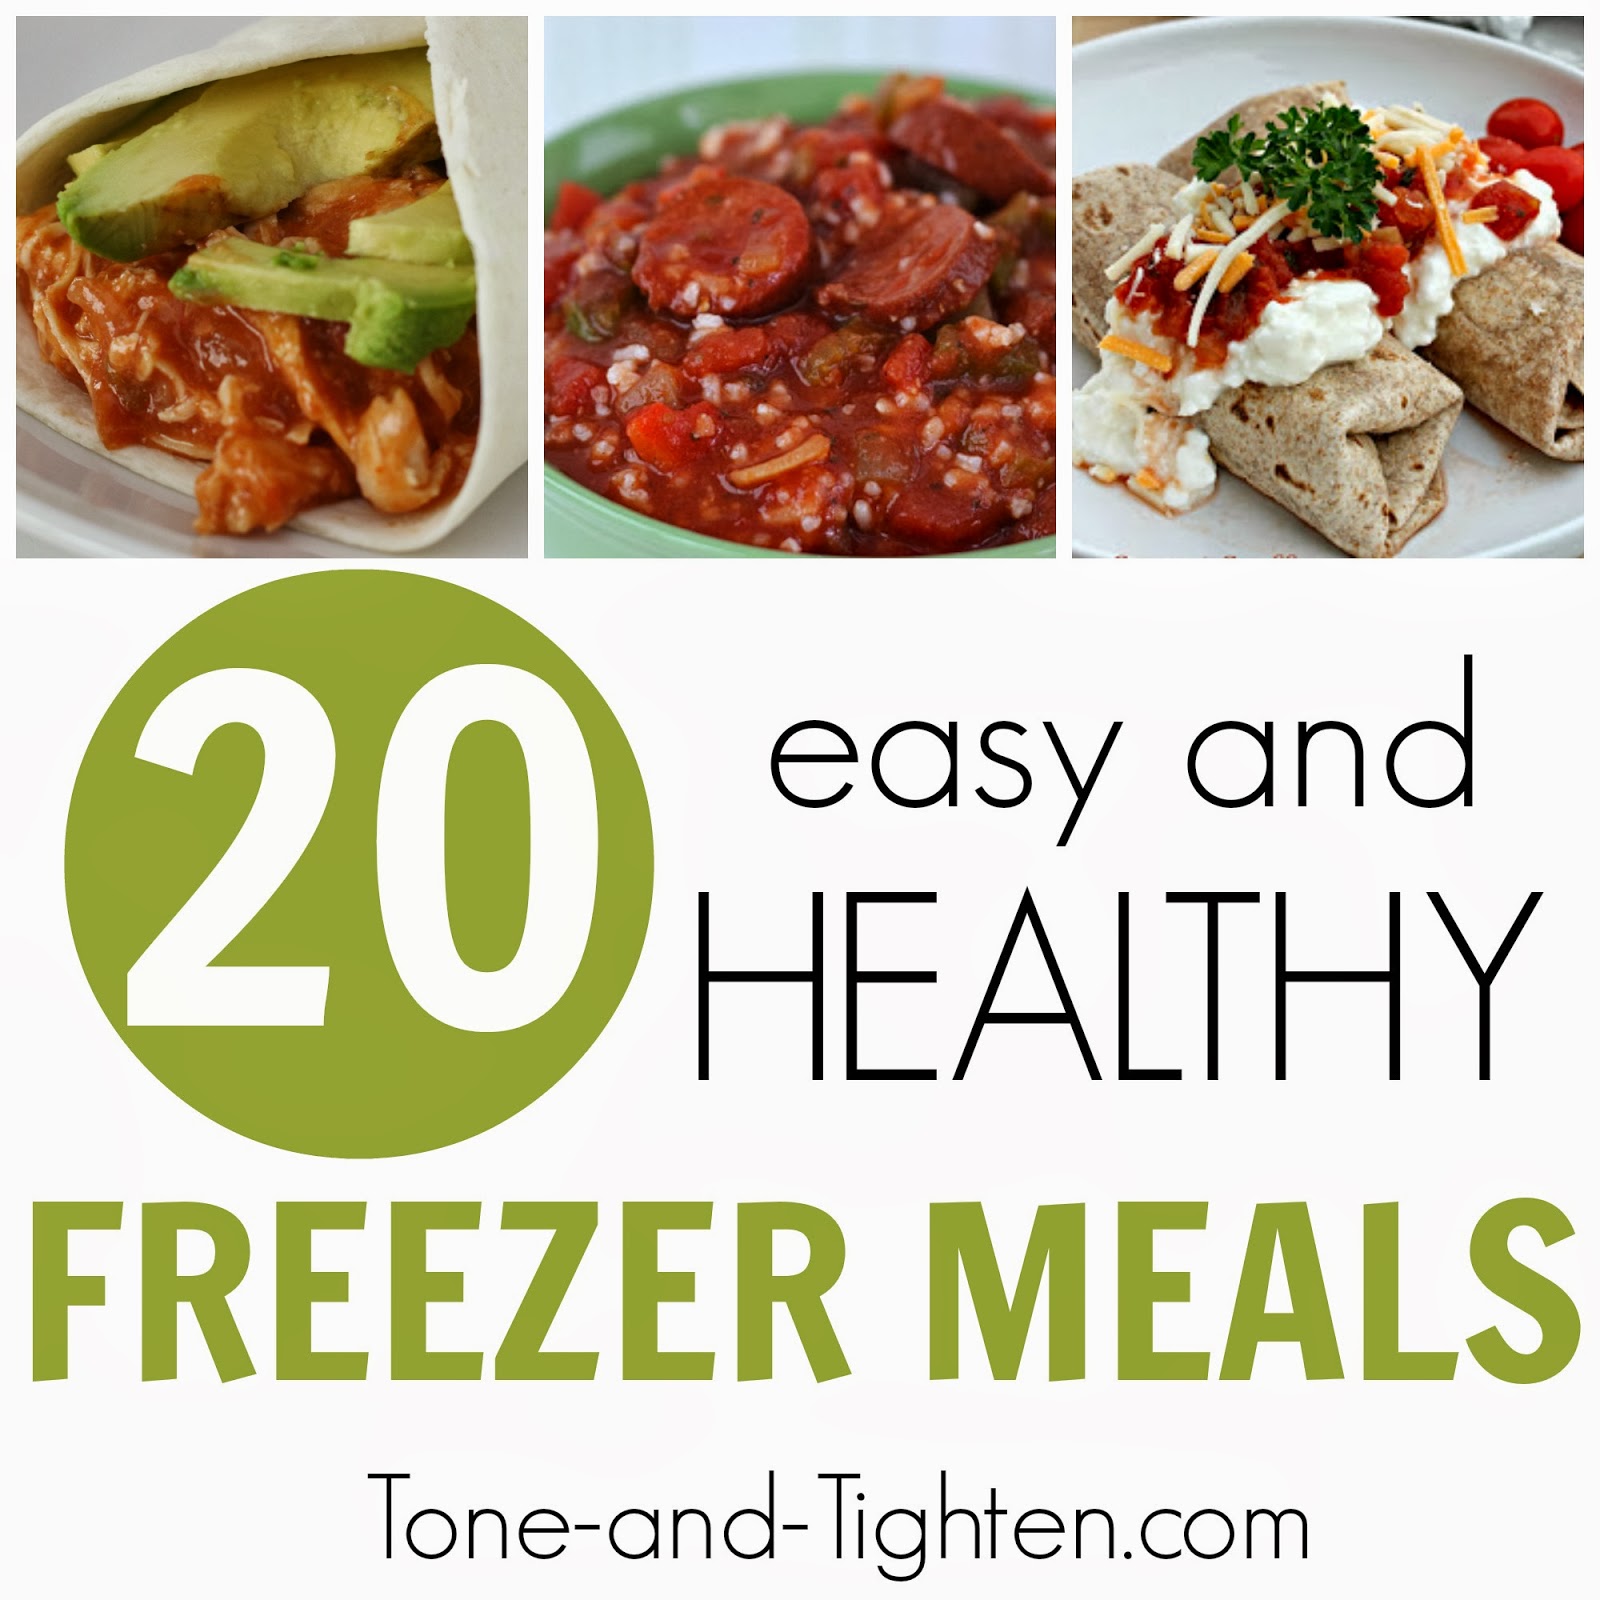 20 Easy and Healthy Freezer Meals